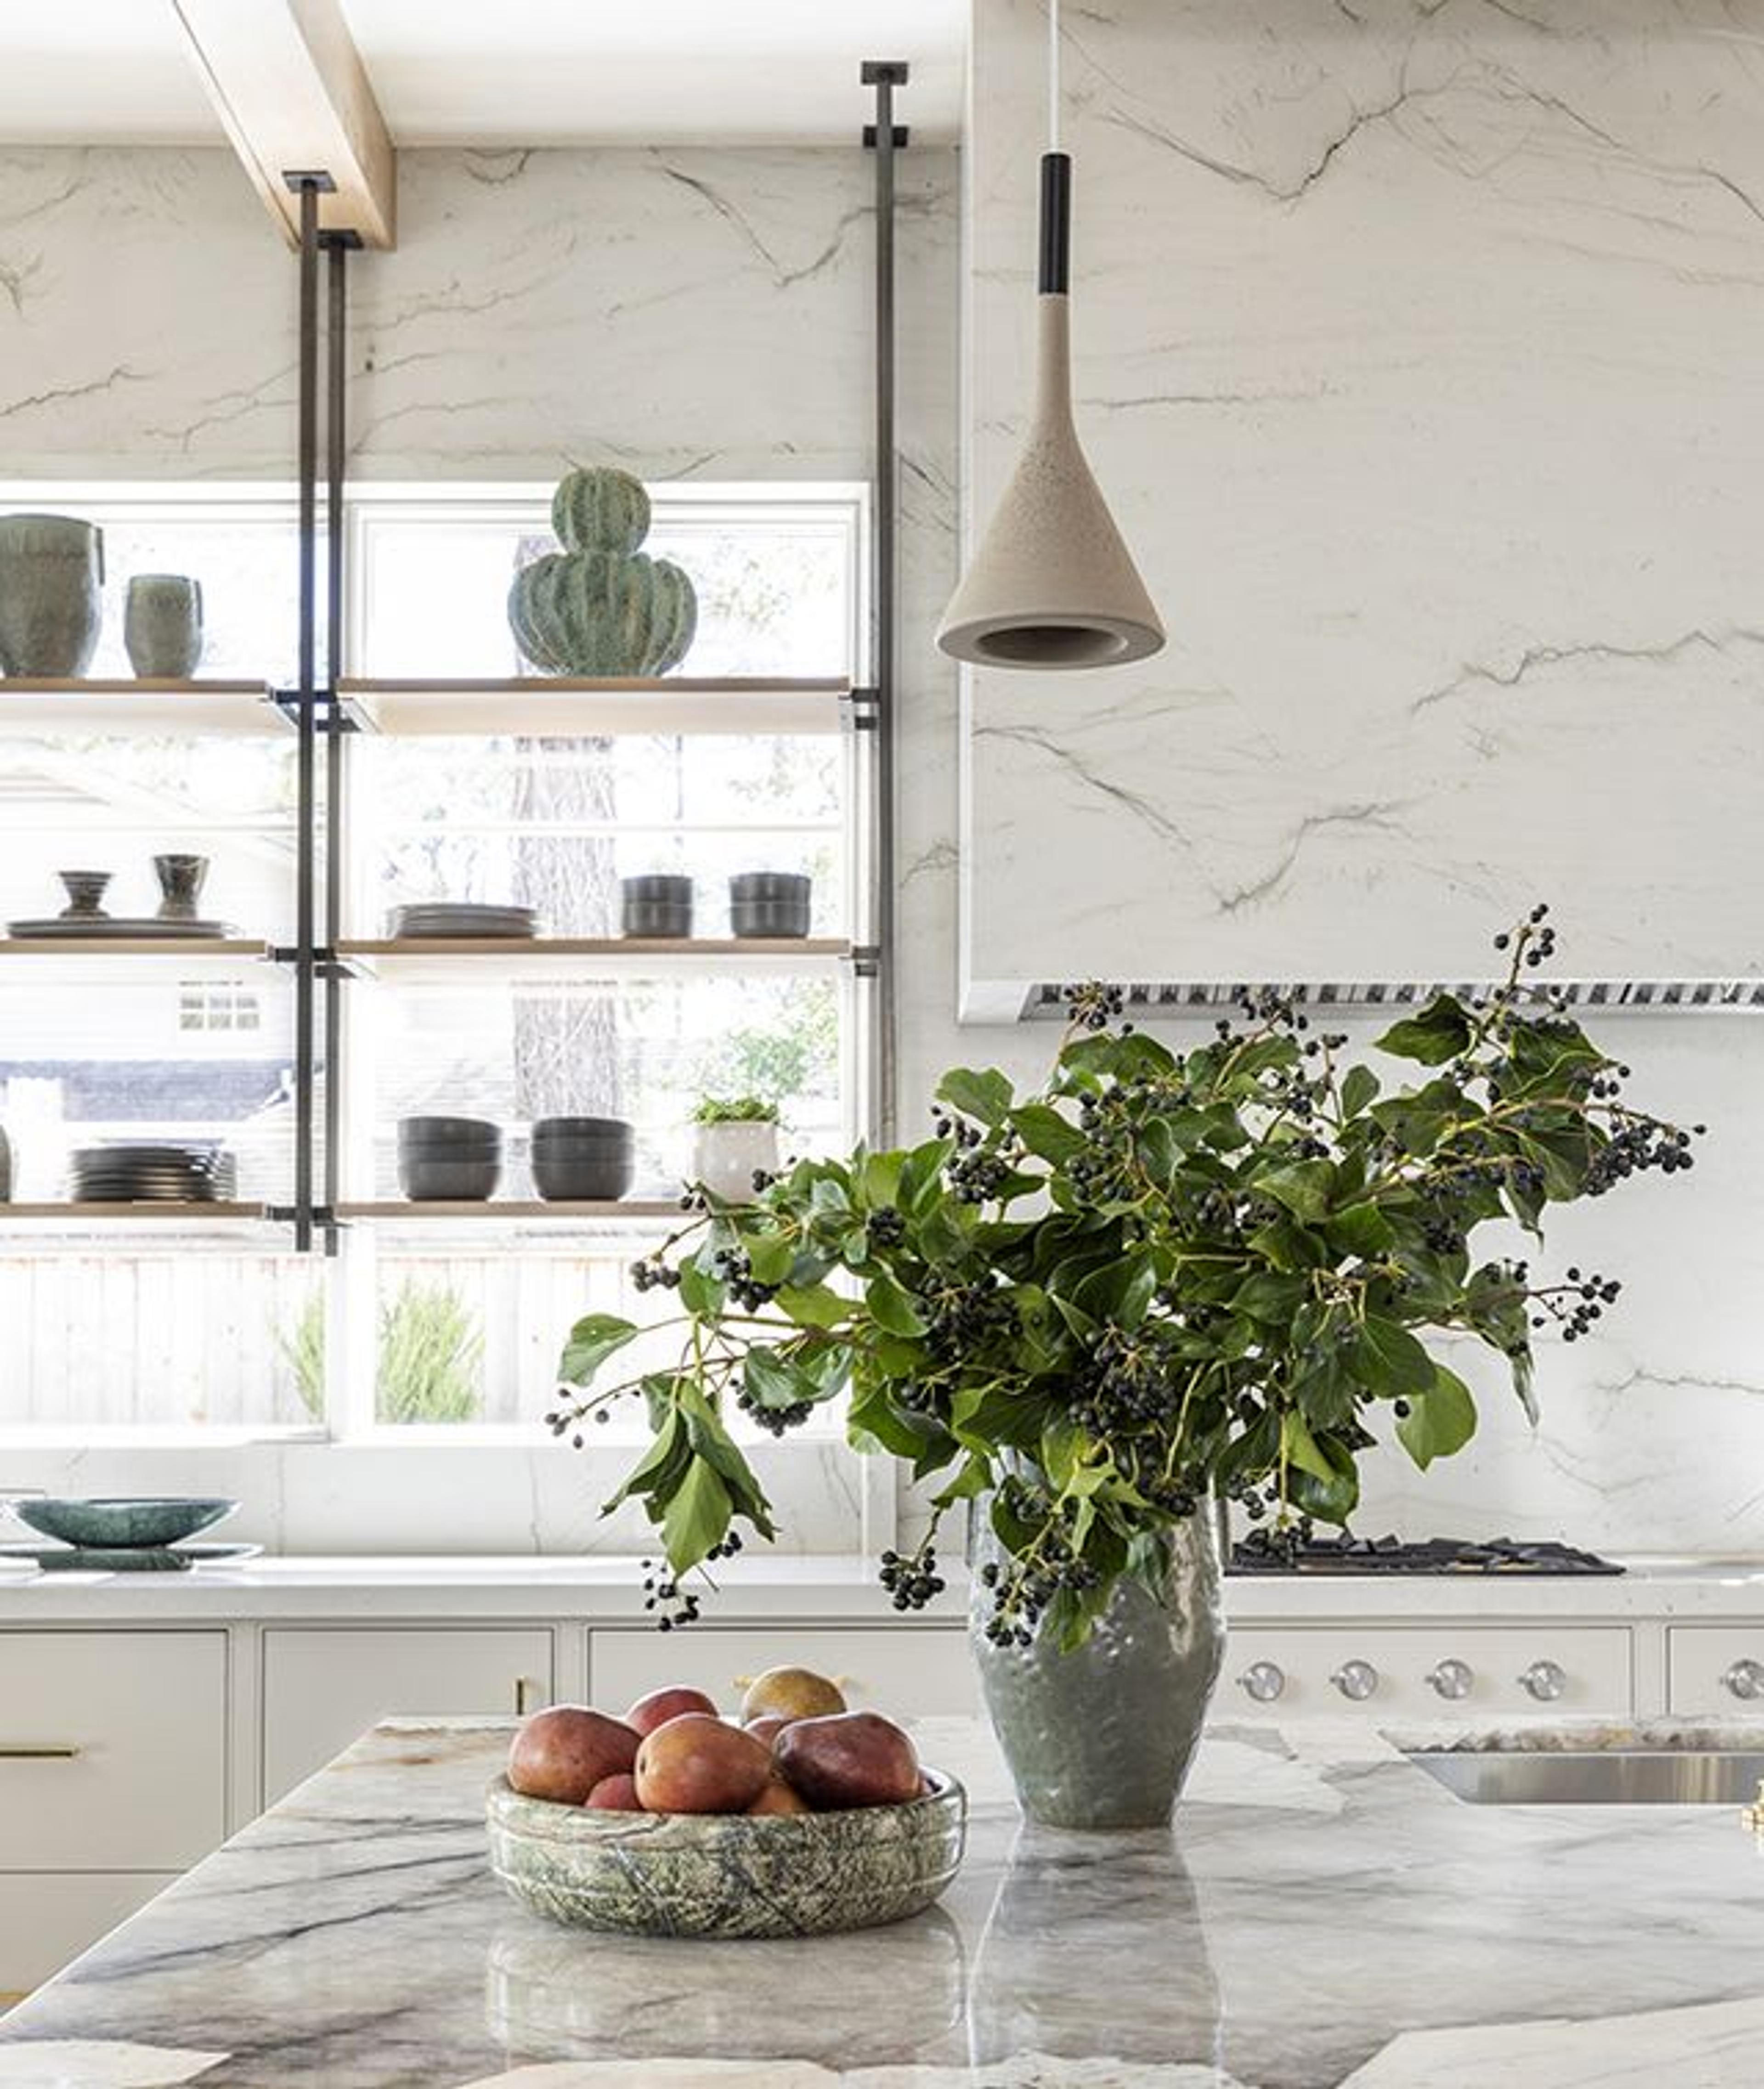 In this gorgeous European-style kitchen, suspended mixed-material open shelving serves as the centerpiece of the room while allowing ample natural light to enter the room. Quartzite stone countertops surround Gaggenau appliances and provide durable work surfaces. Minimalist concrete and blackened steel pendants provide task lighting without overpowering the space and the warm, wooden ceiling beams tie in brass details found throughout.